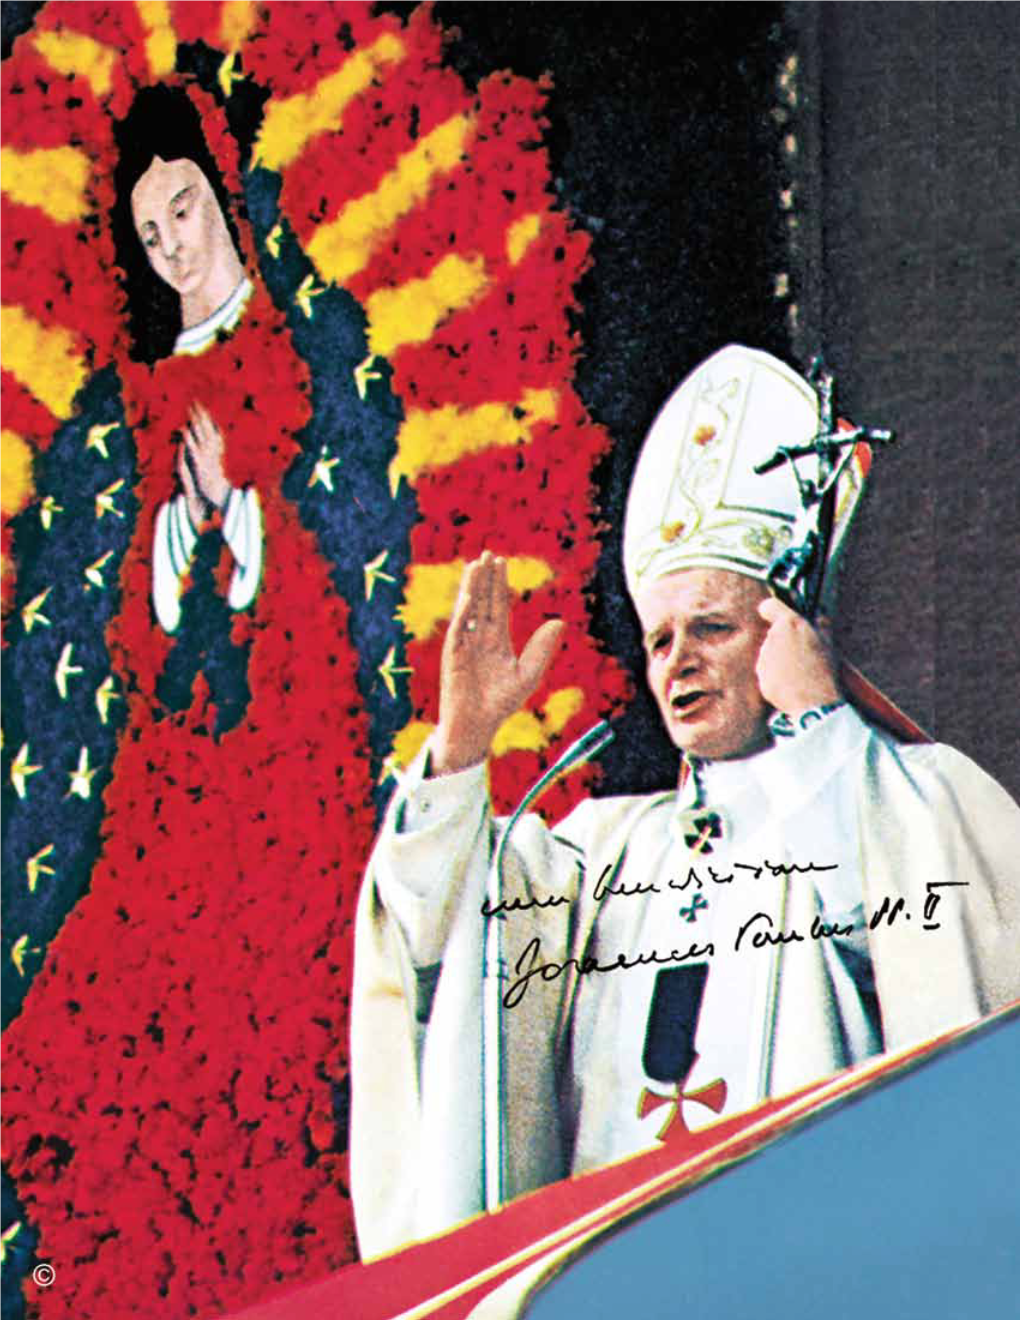 Queen of the Americas Guild 1 His Holiness, Pope John Paul II